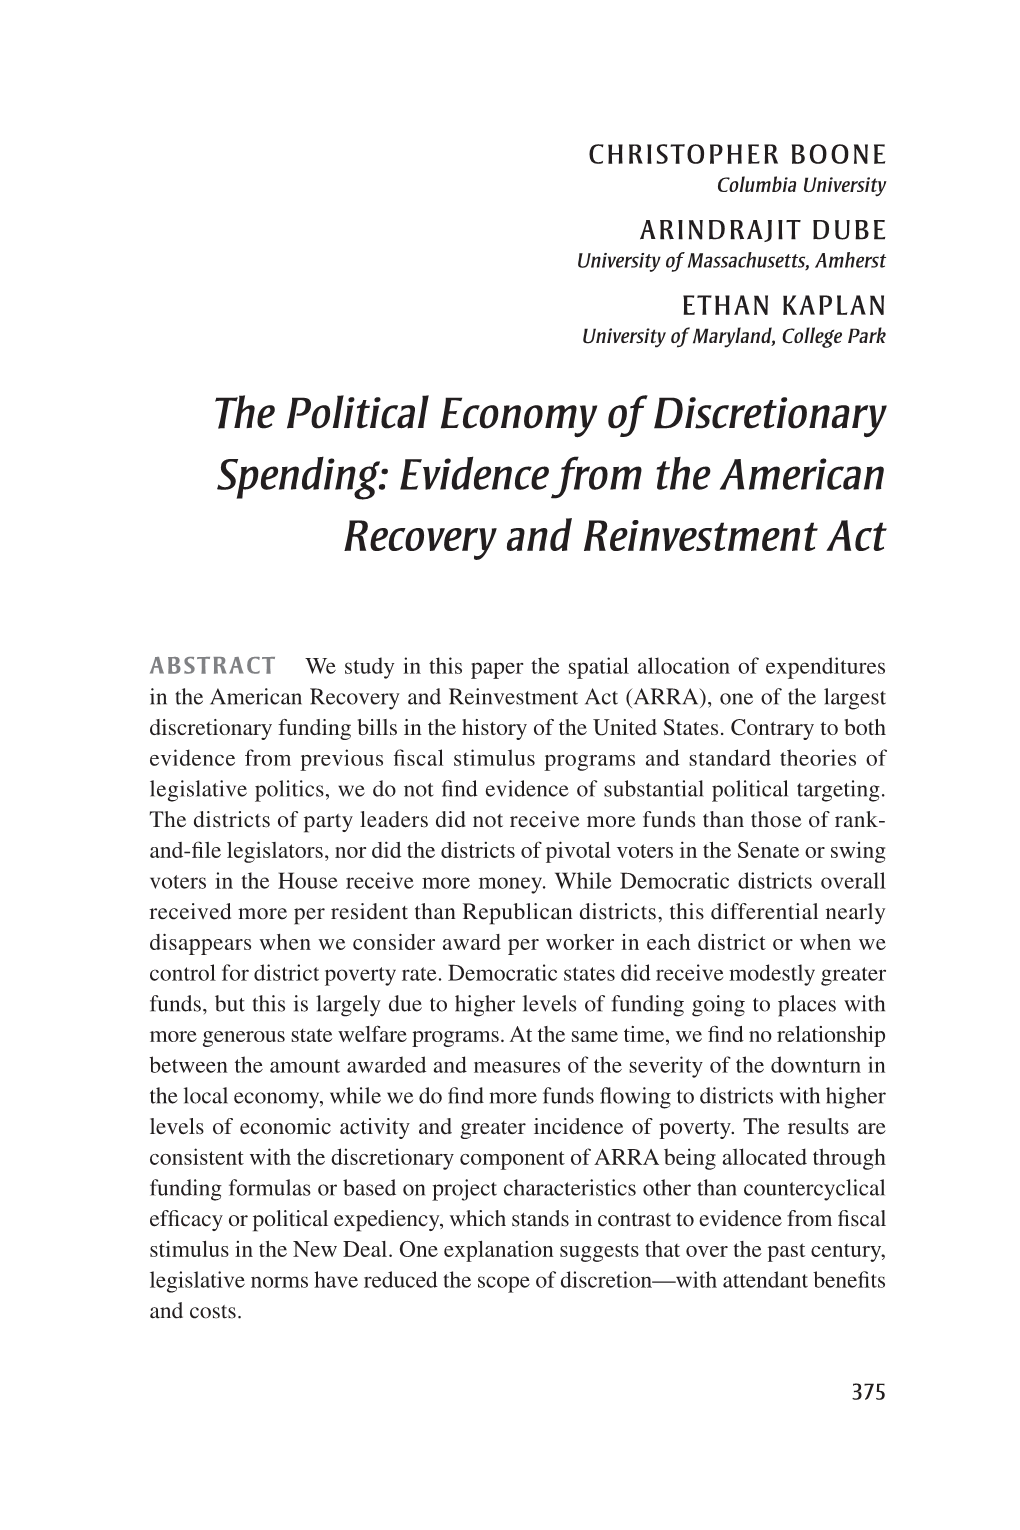 The Political Economy of Discretionary Spending: Evidence from the American Recovery and Reinvestment Act